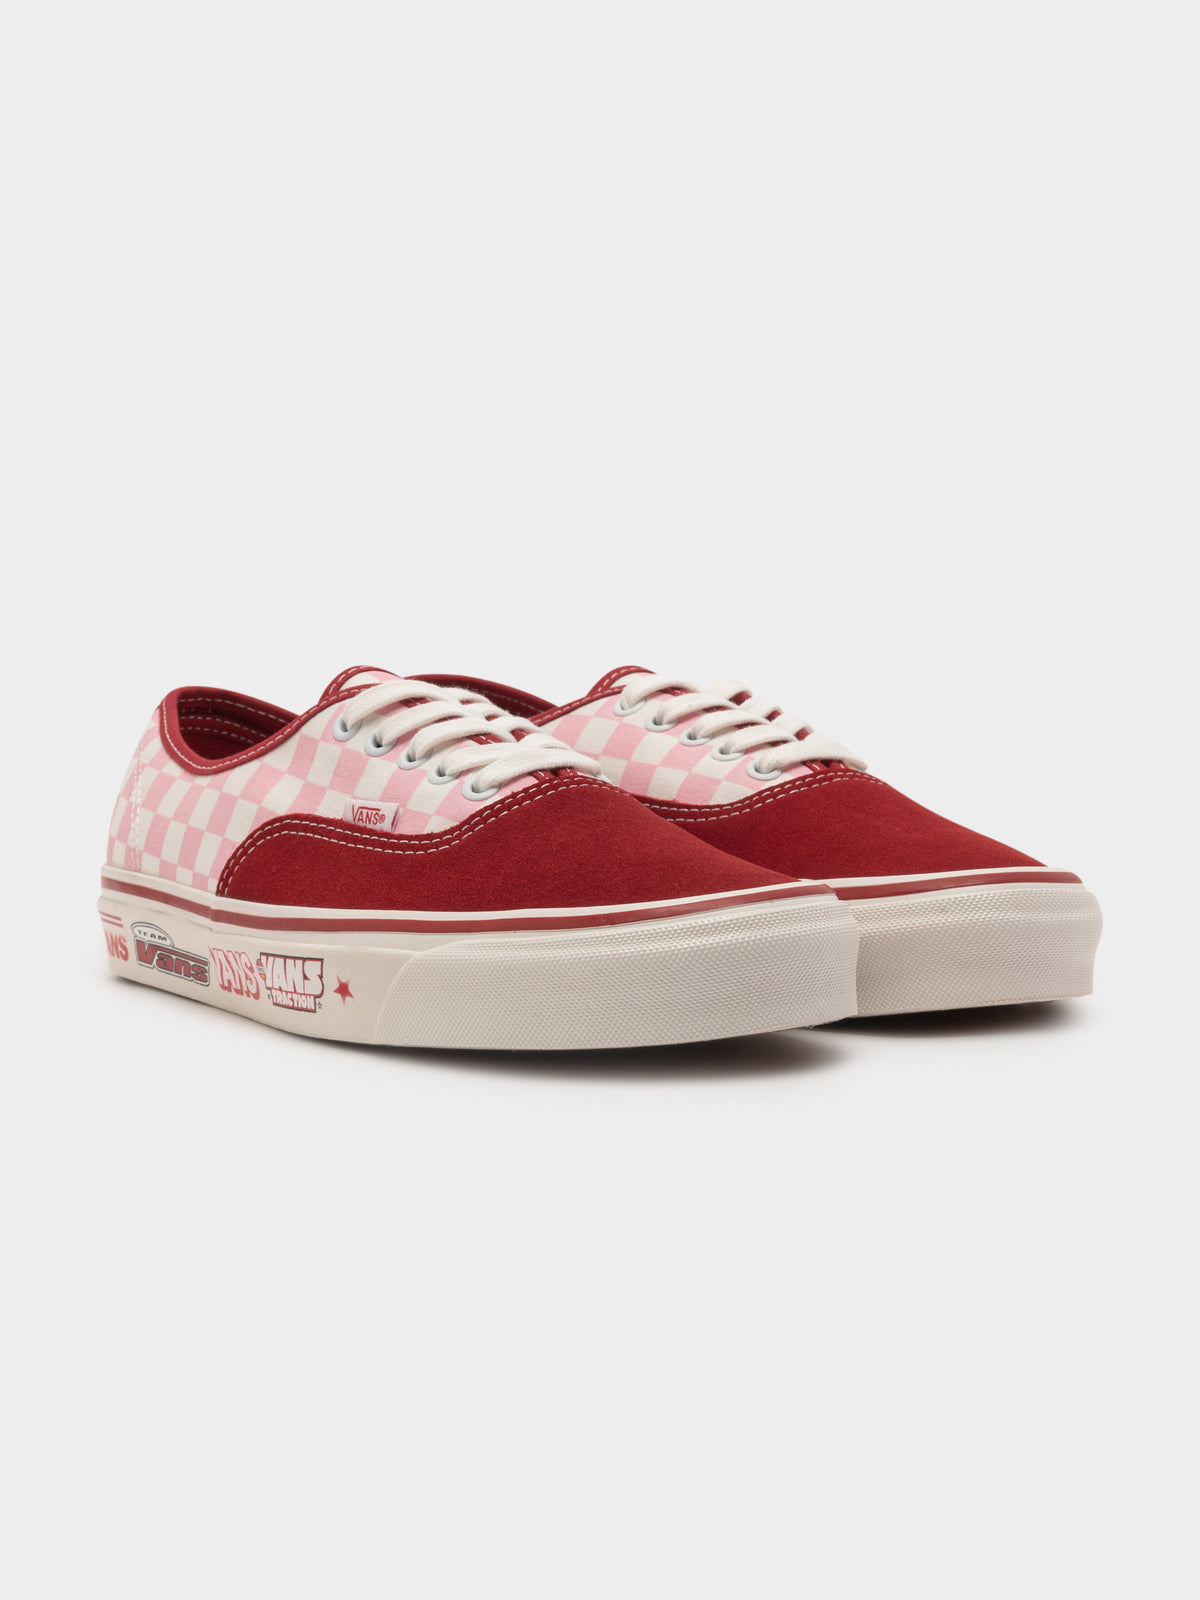 Unisex Authentic 44 DX Anaheim Sneakers in Chili Pepper